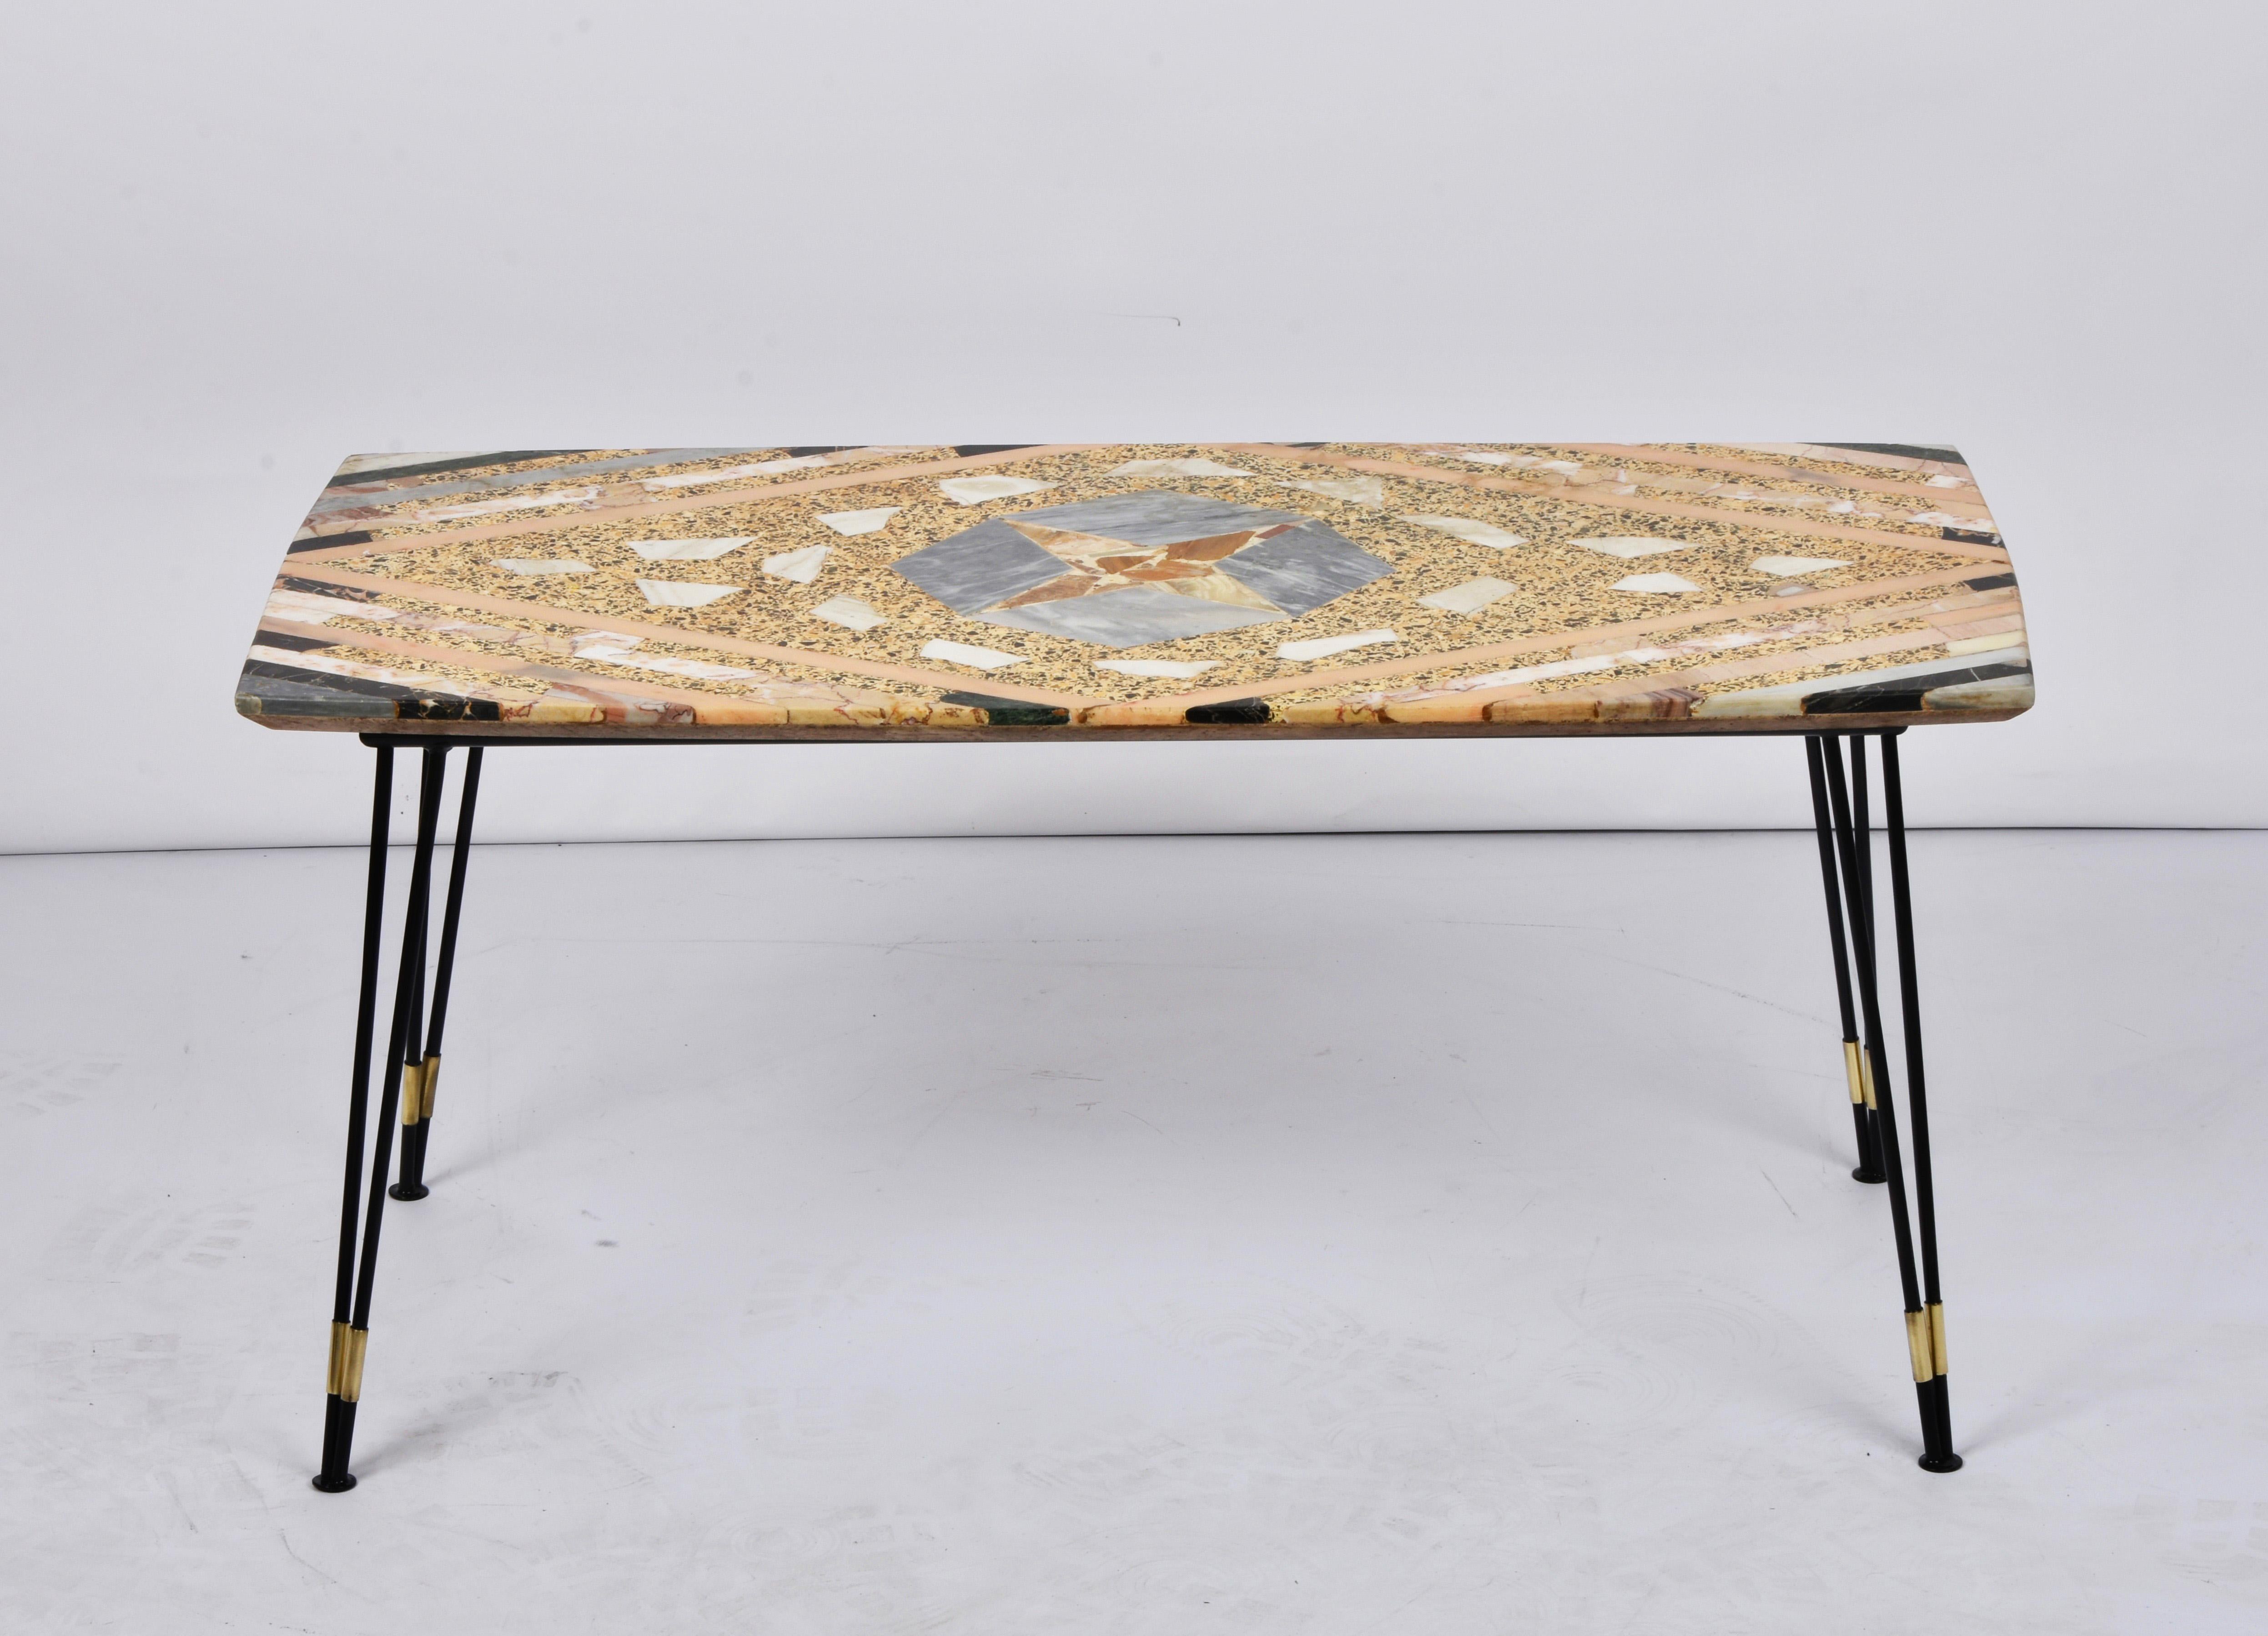 Lacquered Midcentury Italian Inlaid Marble Coffee Table with Metal and Brass Finish, 1950s